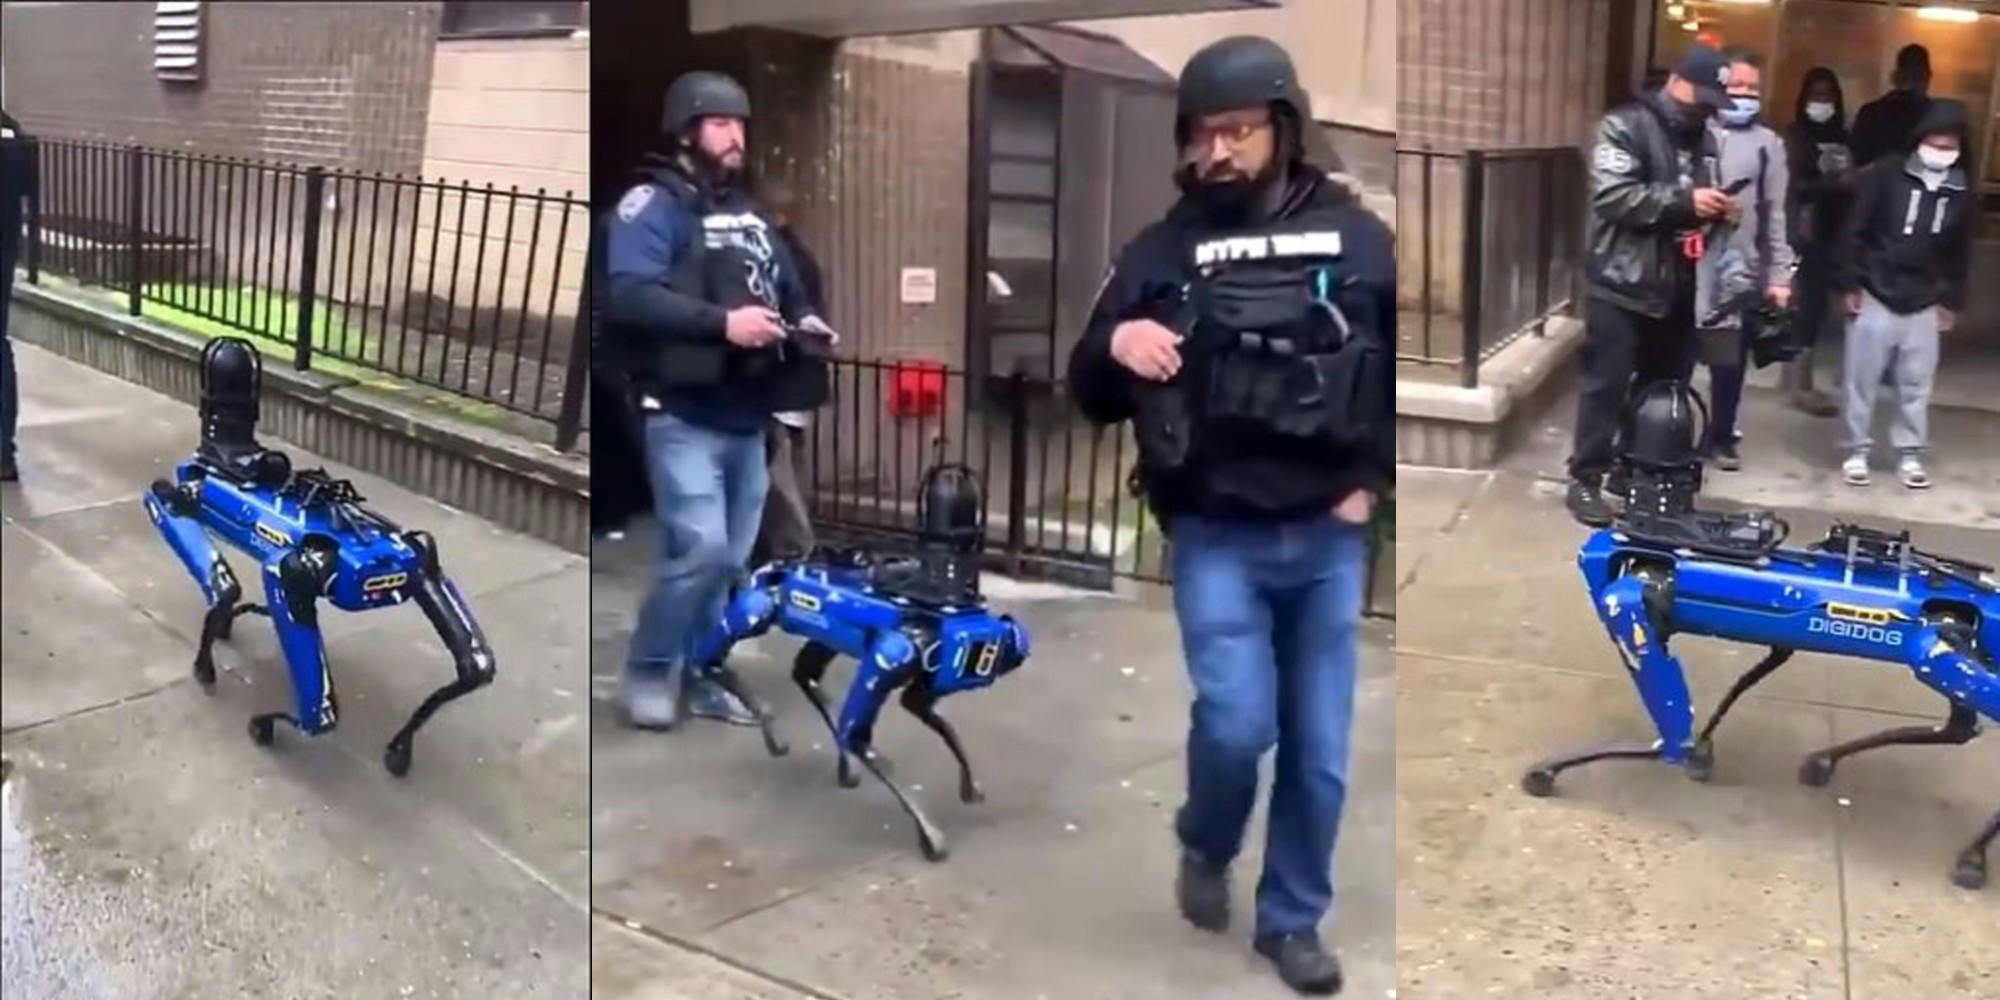 Police in New York with a 'Spot' robot